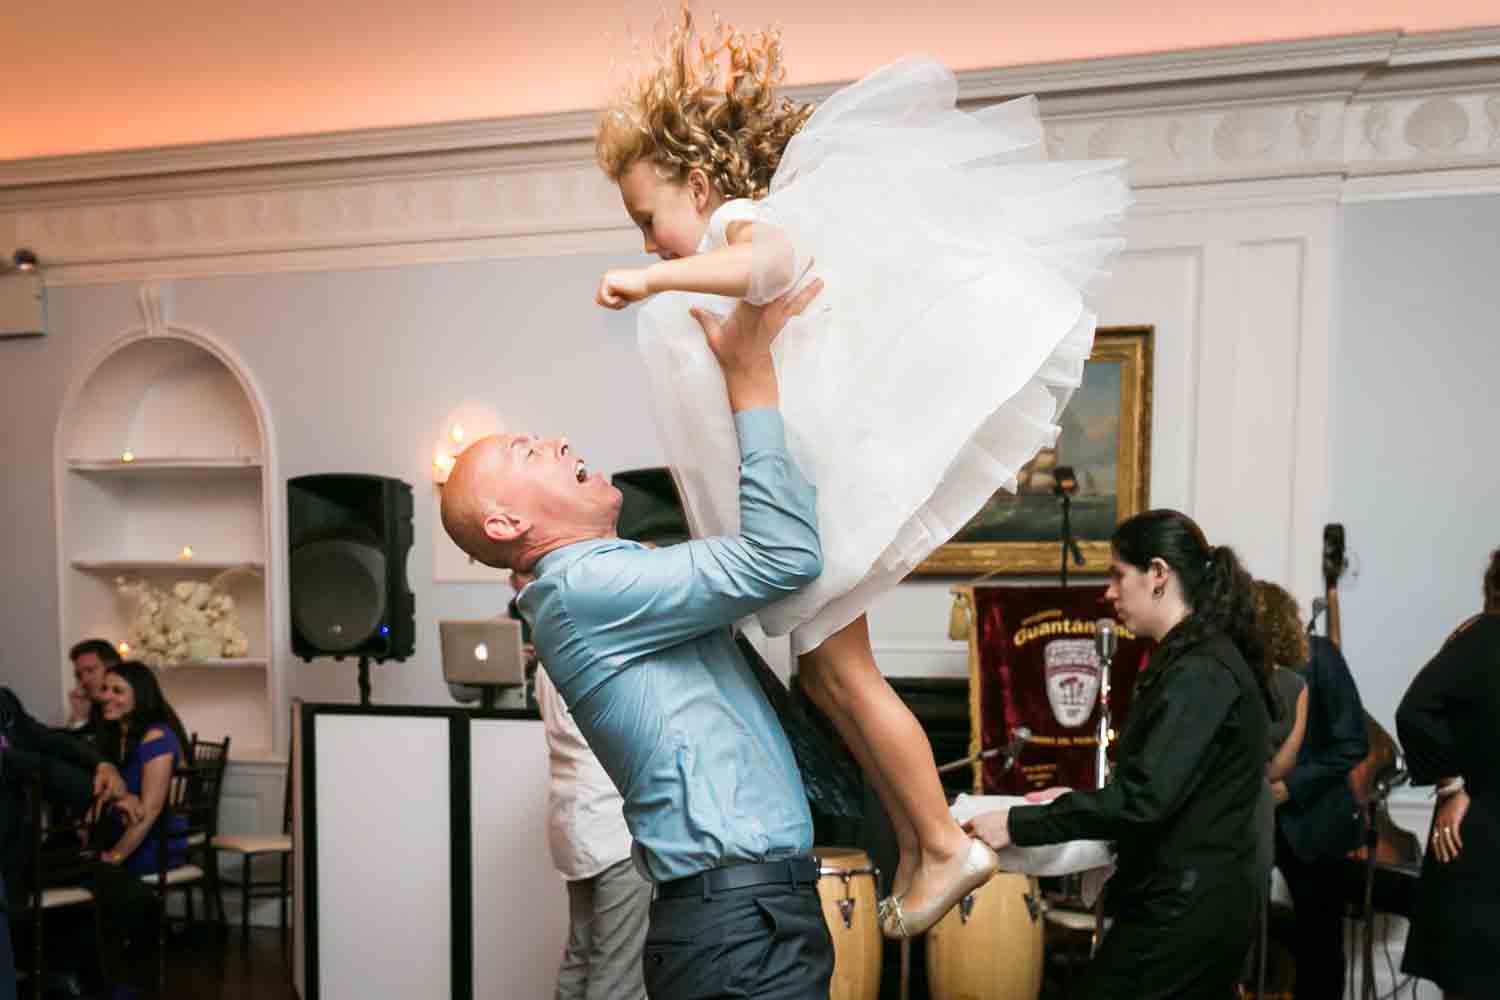 Man throwing little girl up in the air at wedding reception